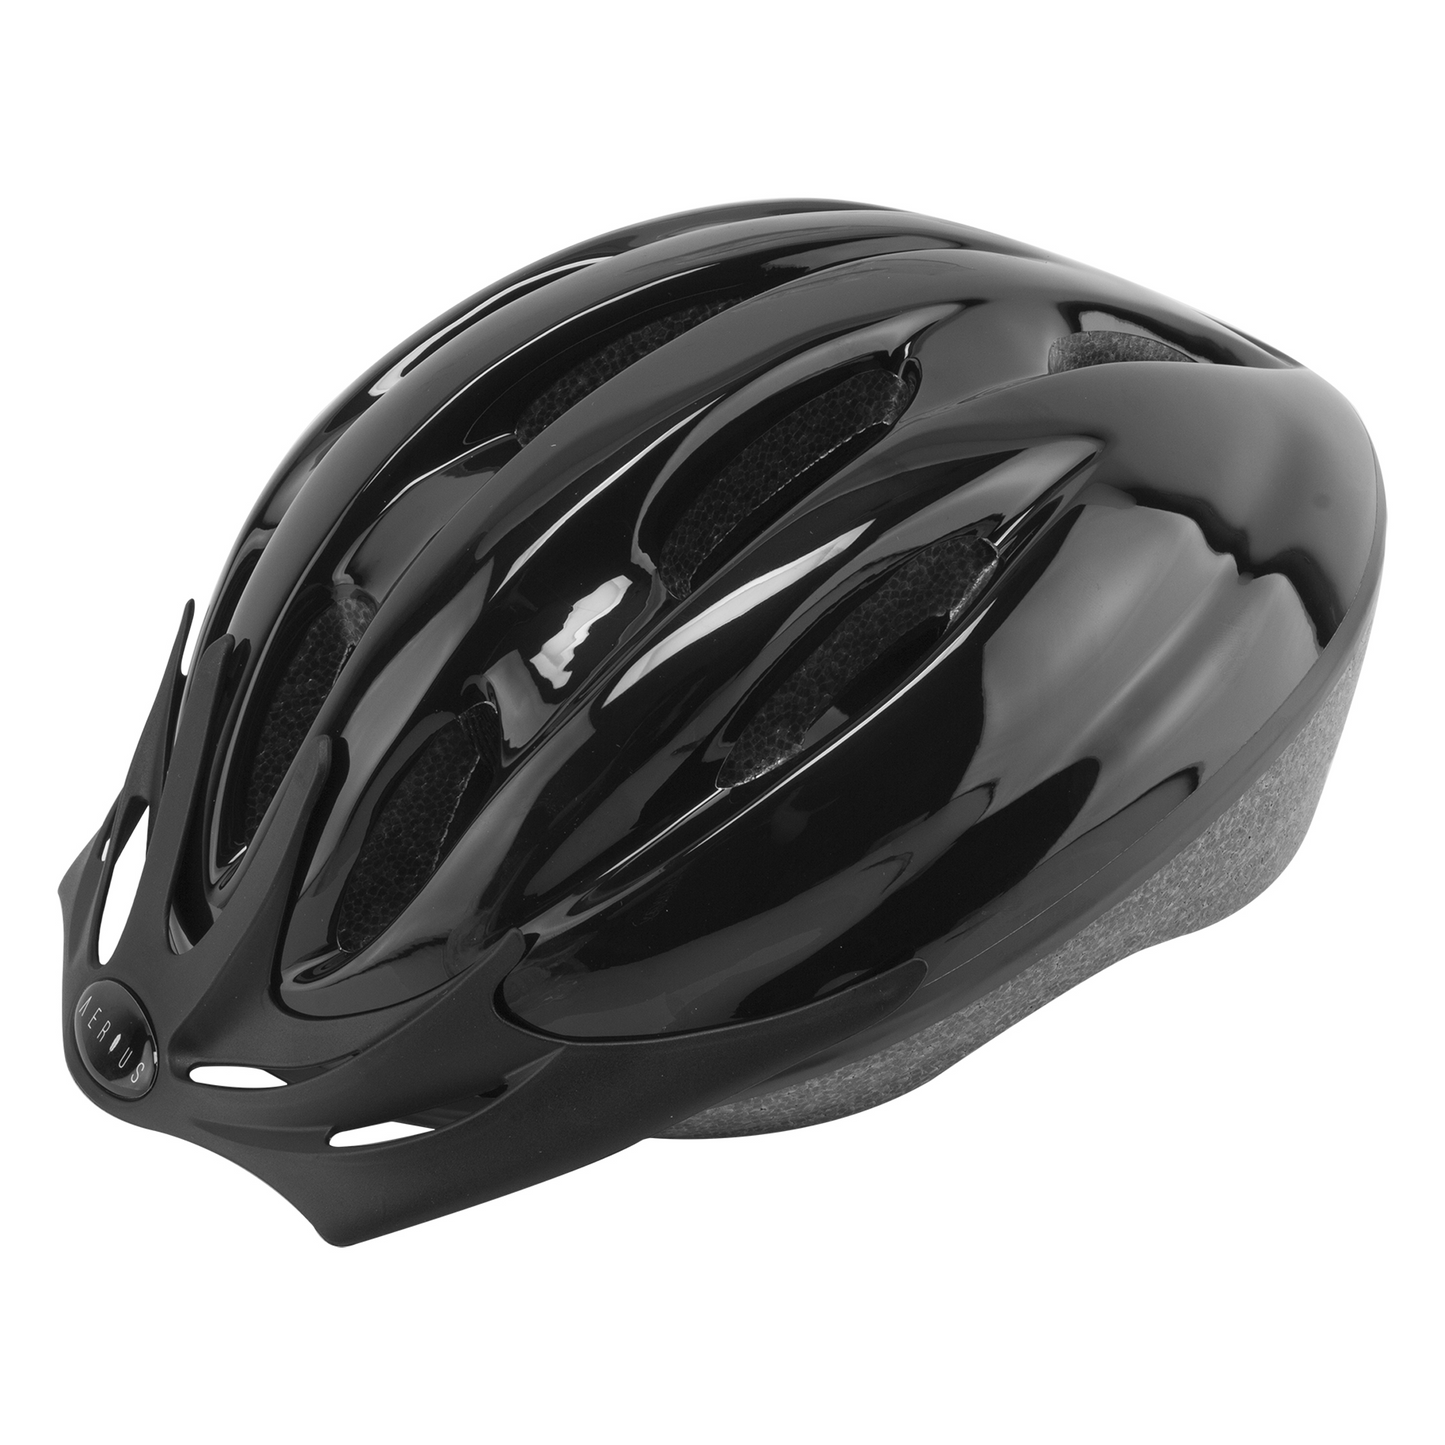 Black Aerius V10 CPSC approved helmet with a removable visor, isolated on a white background.